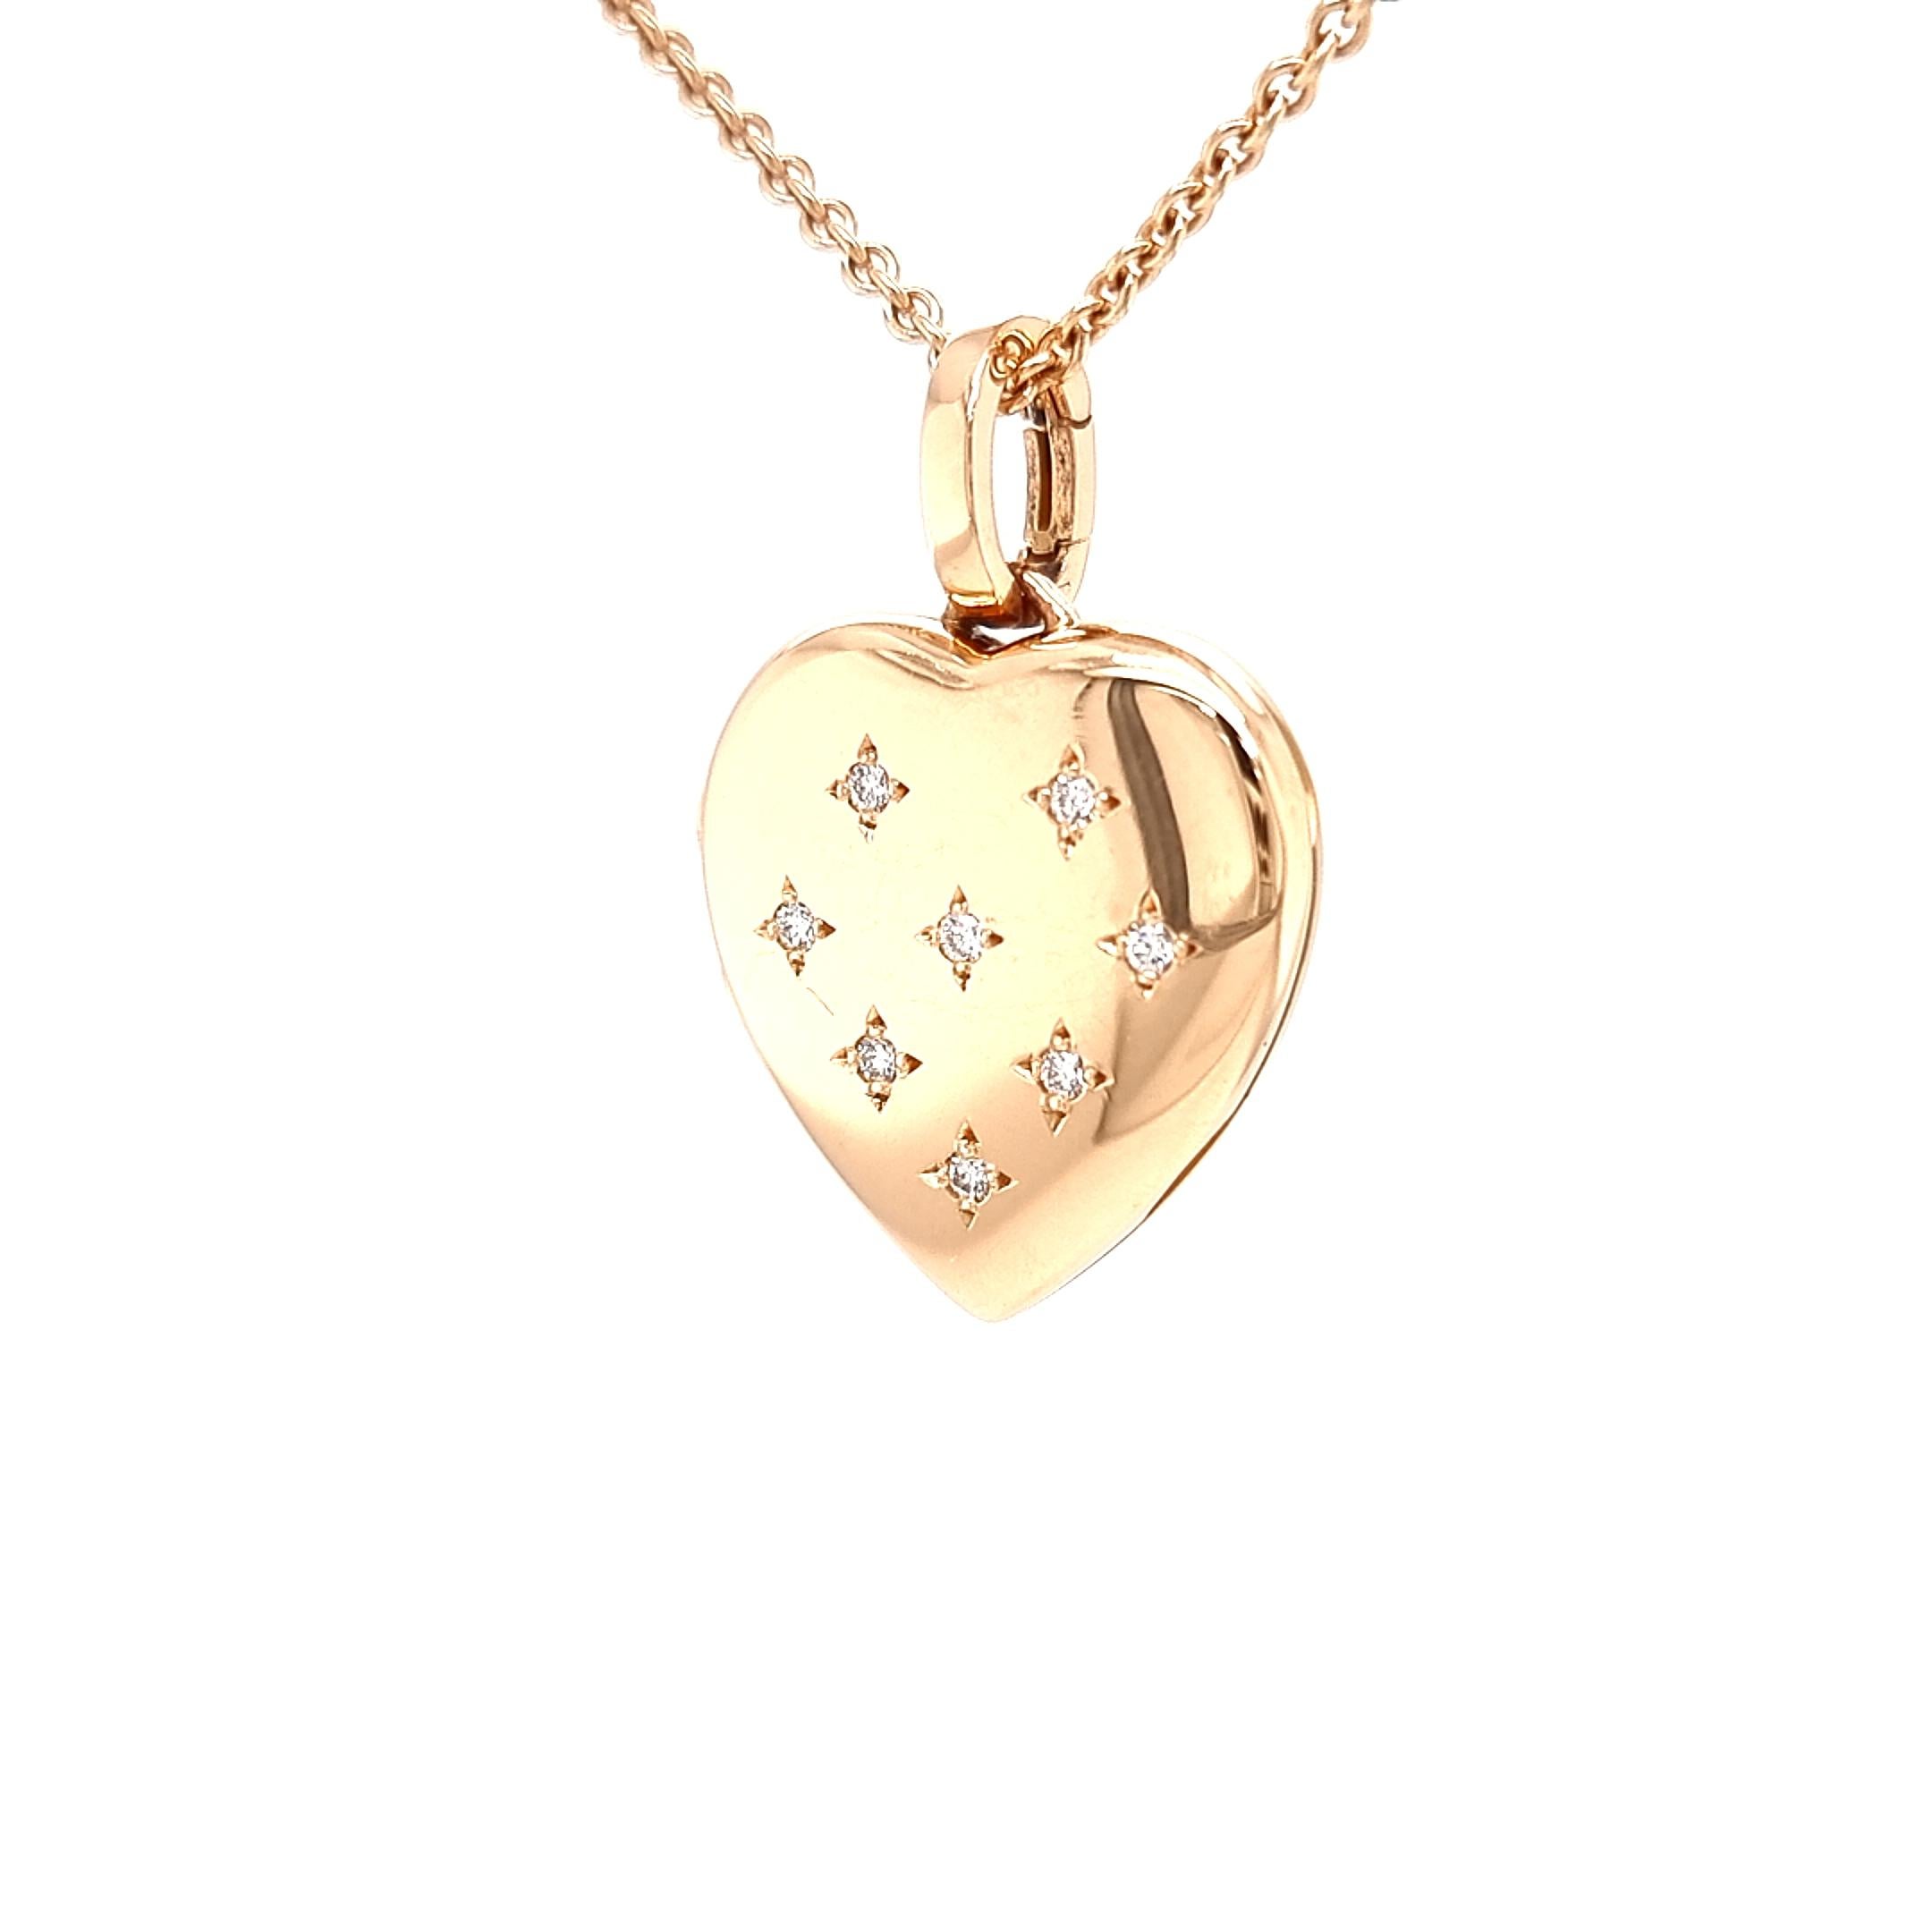 Heart Shaped Locket Pendant by VICTOR MAYER - 18k Rose Gold - 8 Diamonds, total 0.16 ct, H VS for two pictures

About the creator Victor Mayer
Victor Mayer is internationally renowned for elegant timeless designs and unrivalled expertise in historic